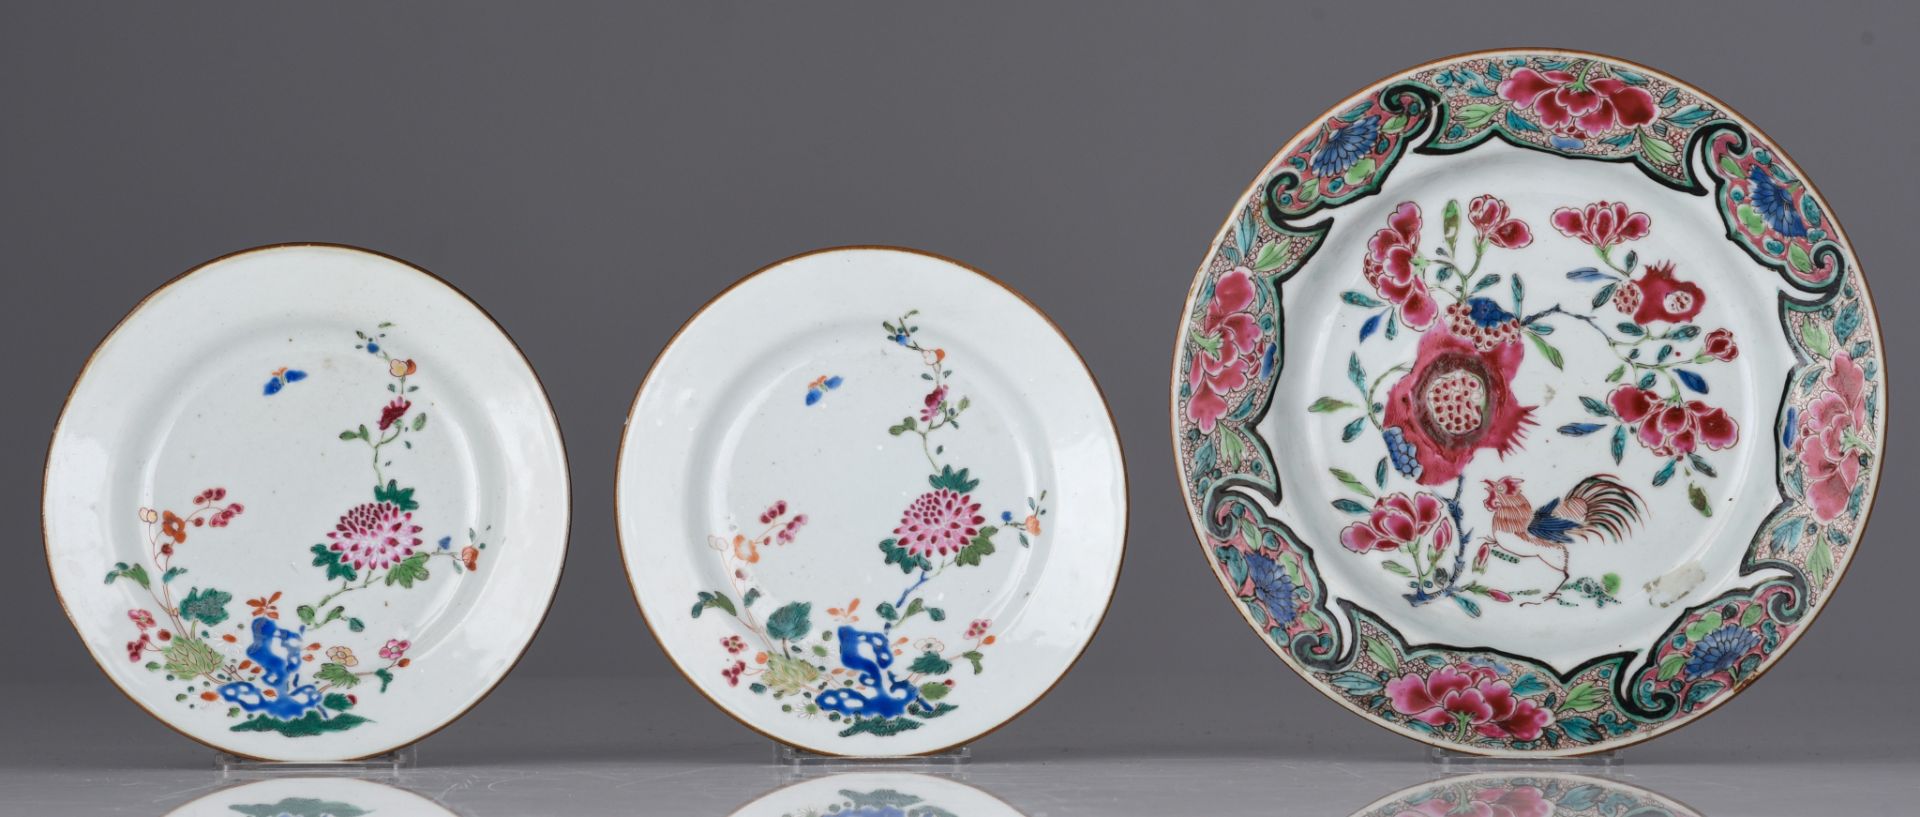 A collection of fine Chinese famille rose export porcelain dishes and a plate, 18thC, largest dimens - Image 6 of 10